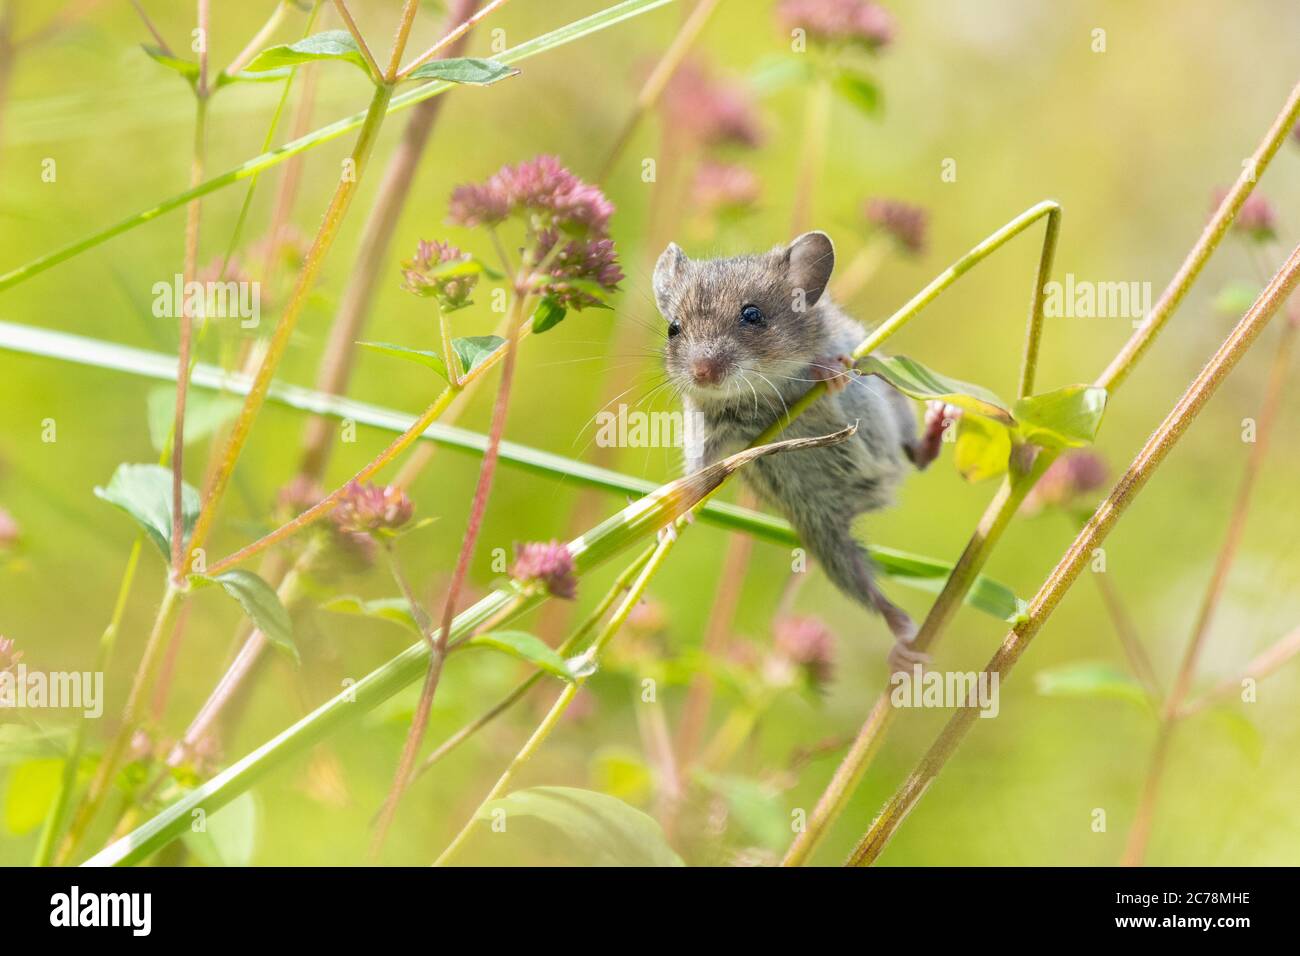 Field mouse Wood Mouse Apodemus sylvaticus climbing plant stems in UK garden collecting seedheads from Aquilegia flowers - Scotland, UK Stock Photo